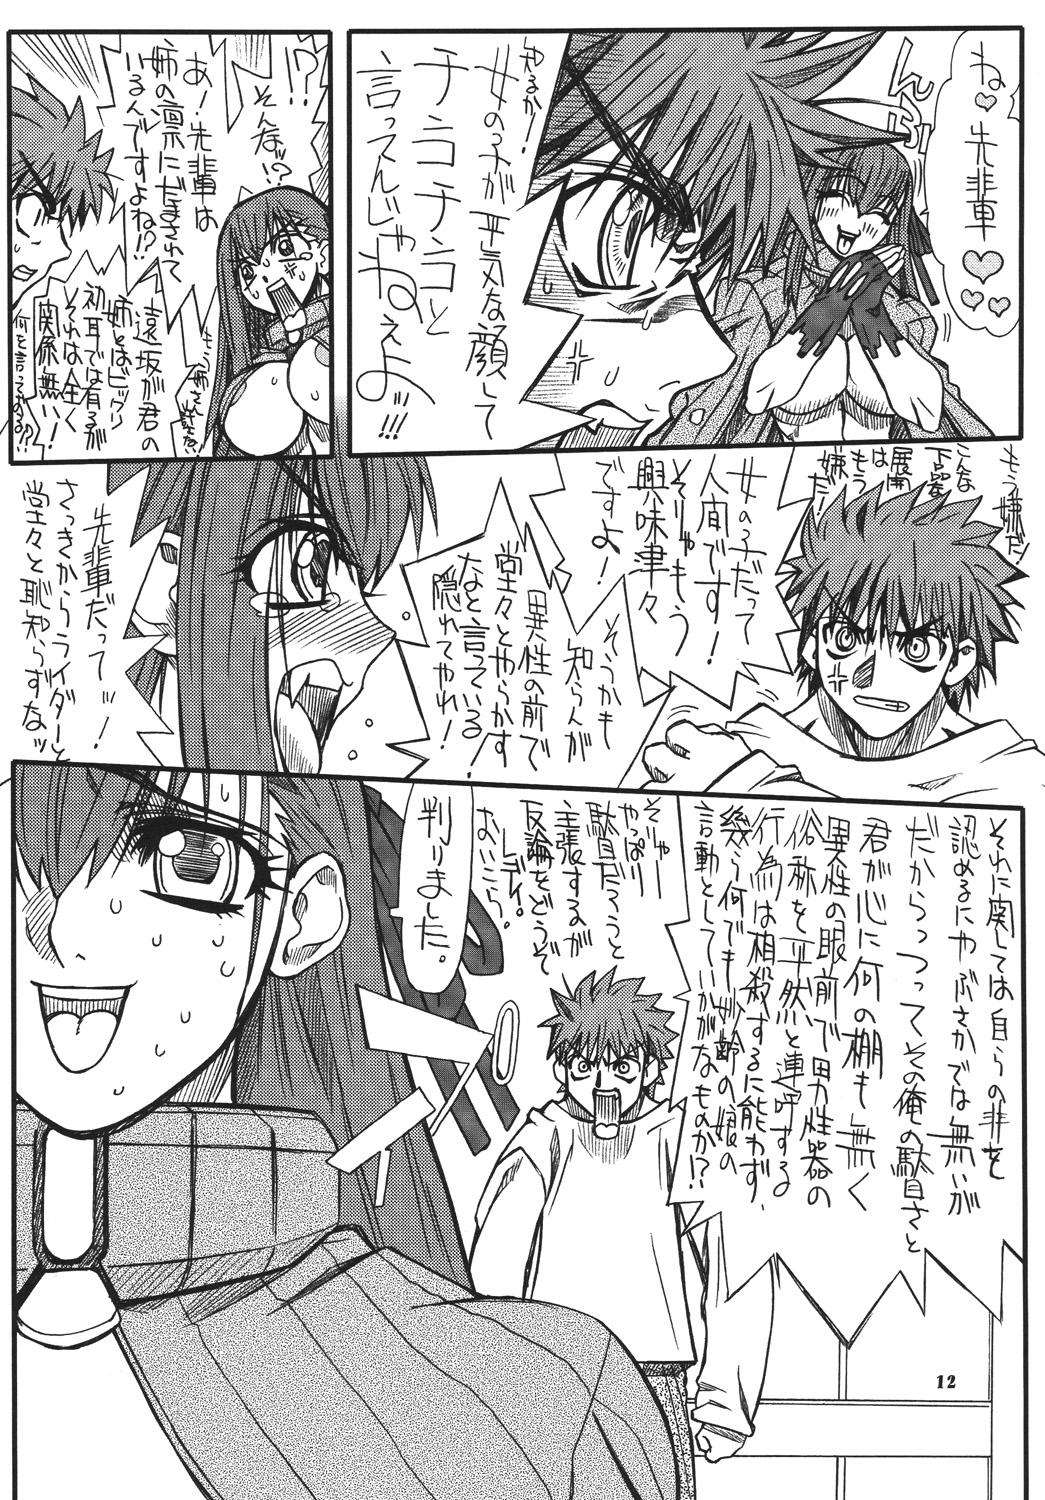 Adult Akihime Yon - Fate stay night Bro - Page 11